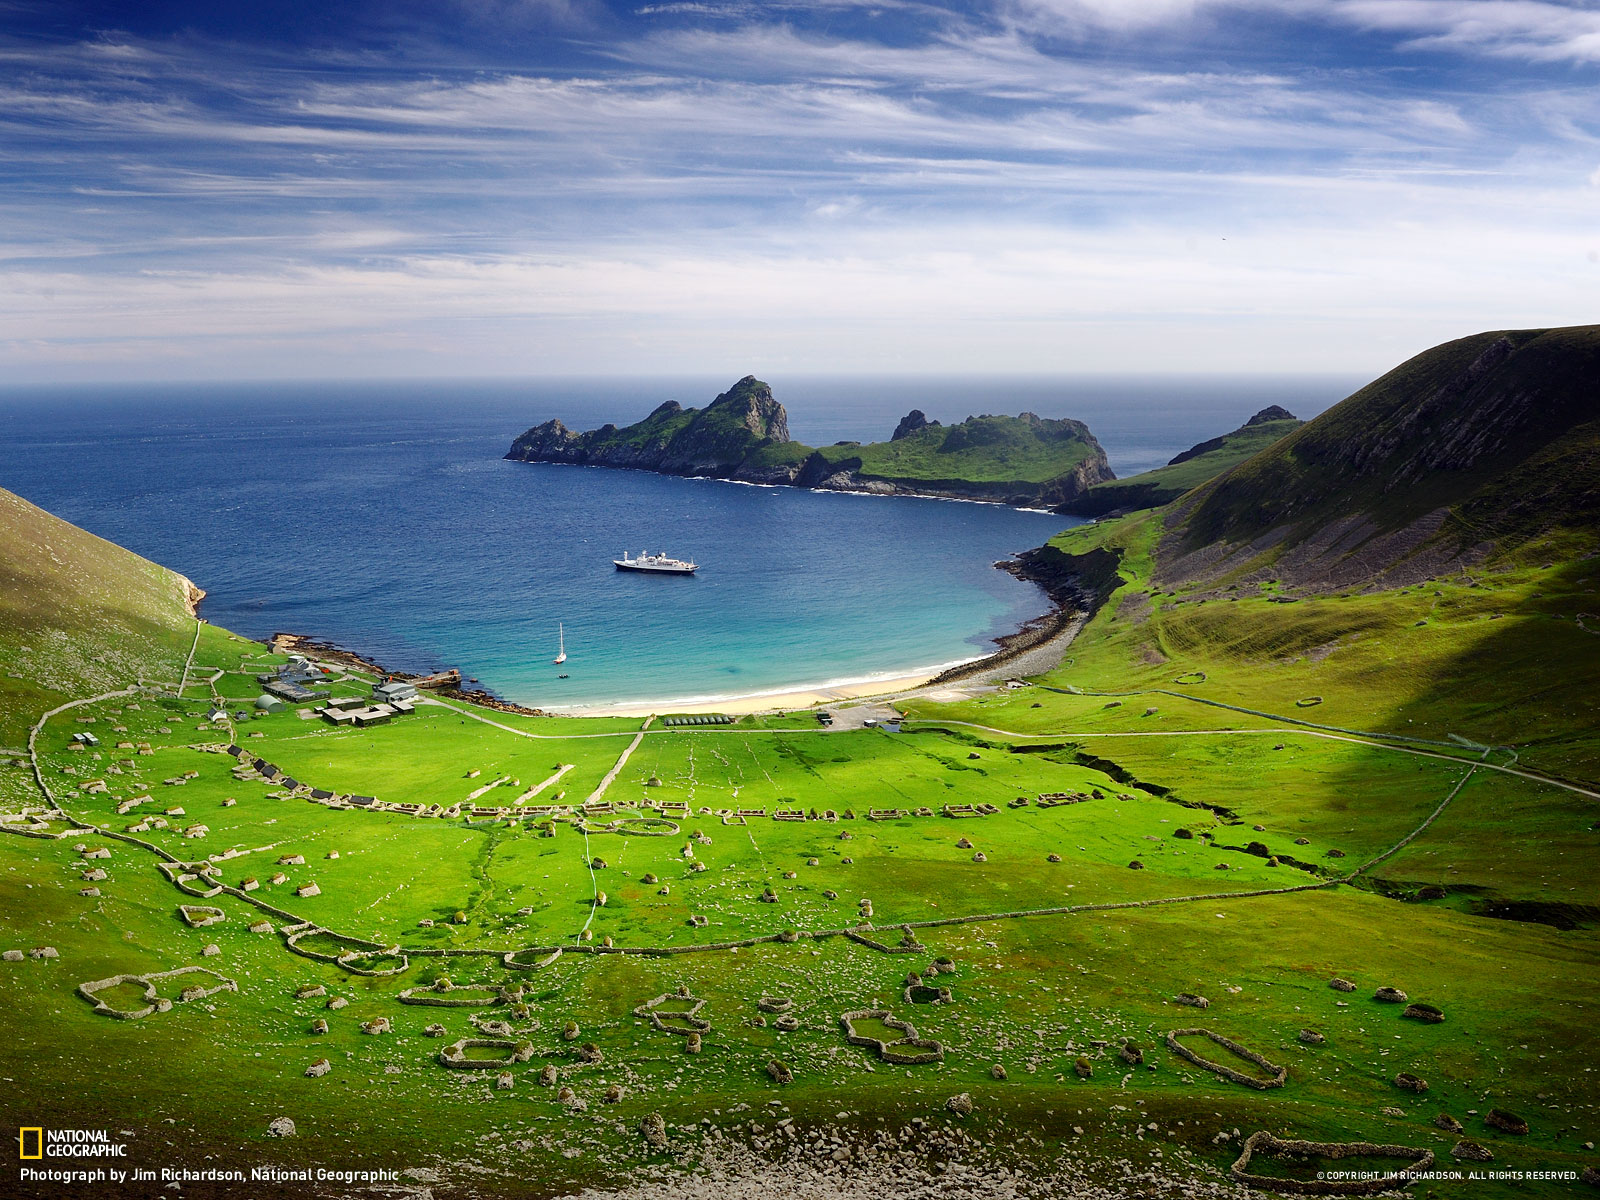 The National Geographic got a photo of sunshine on Hirta- rarer than a ...